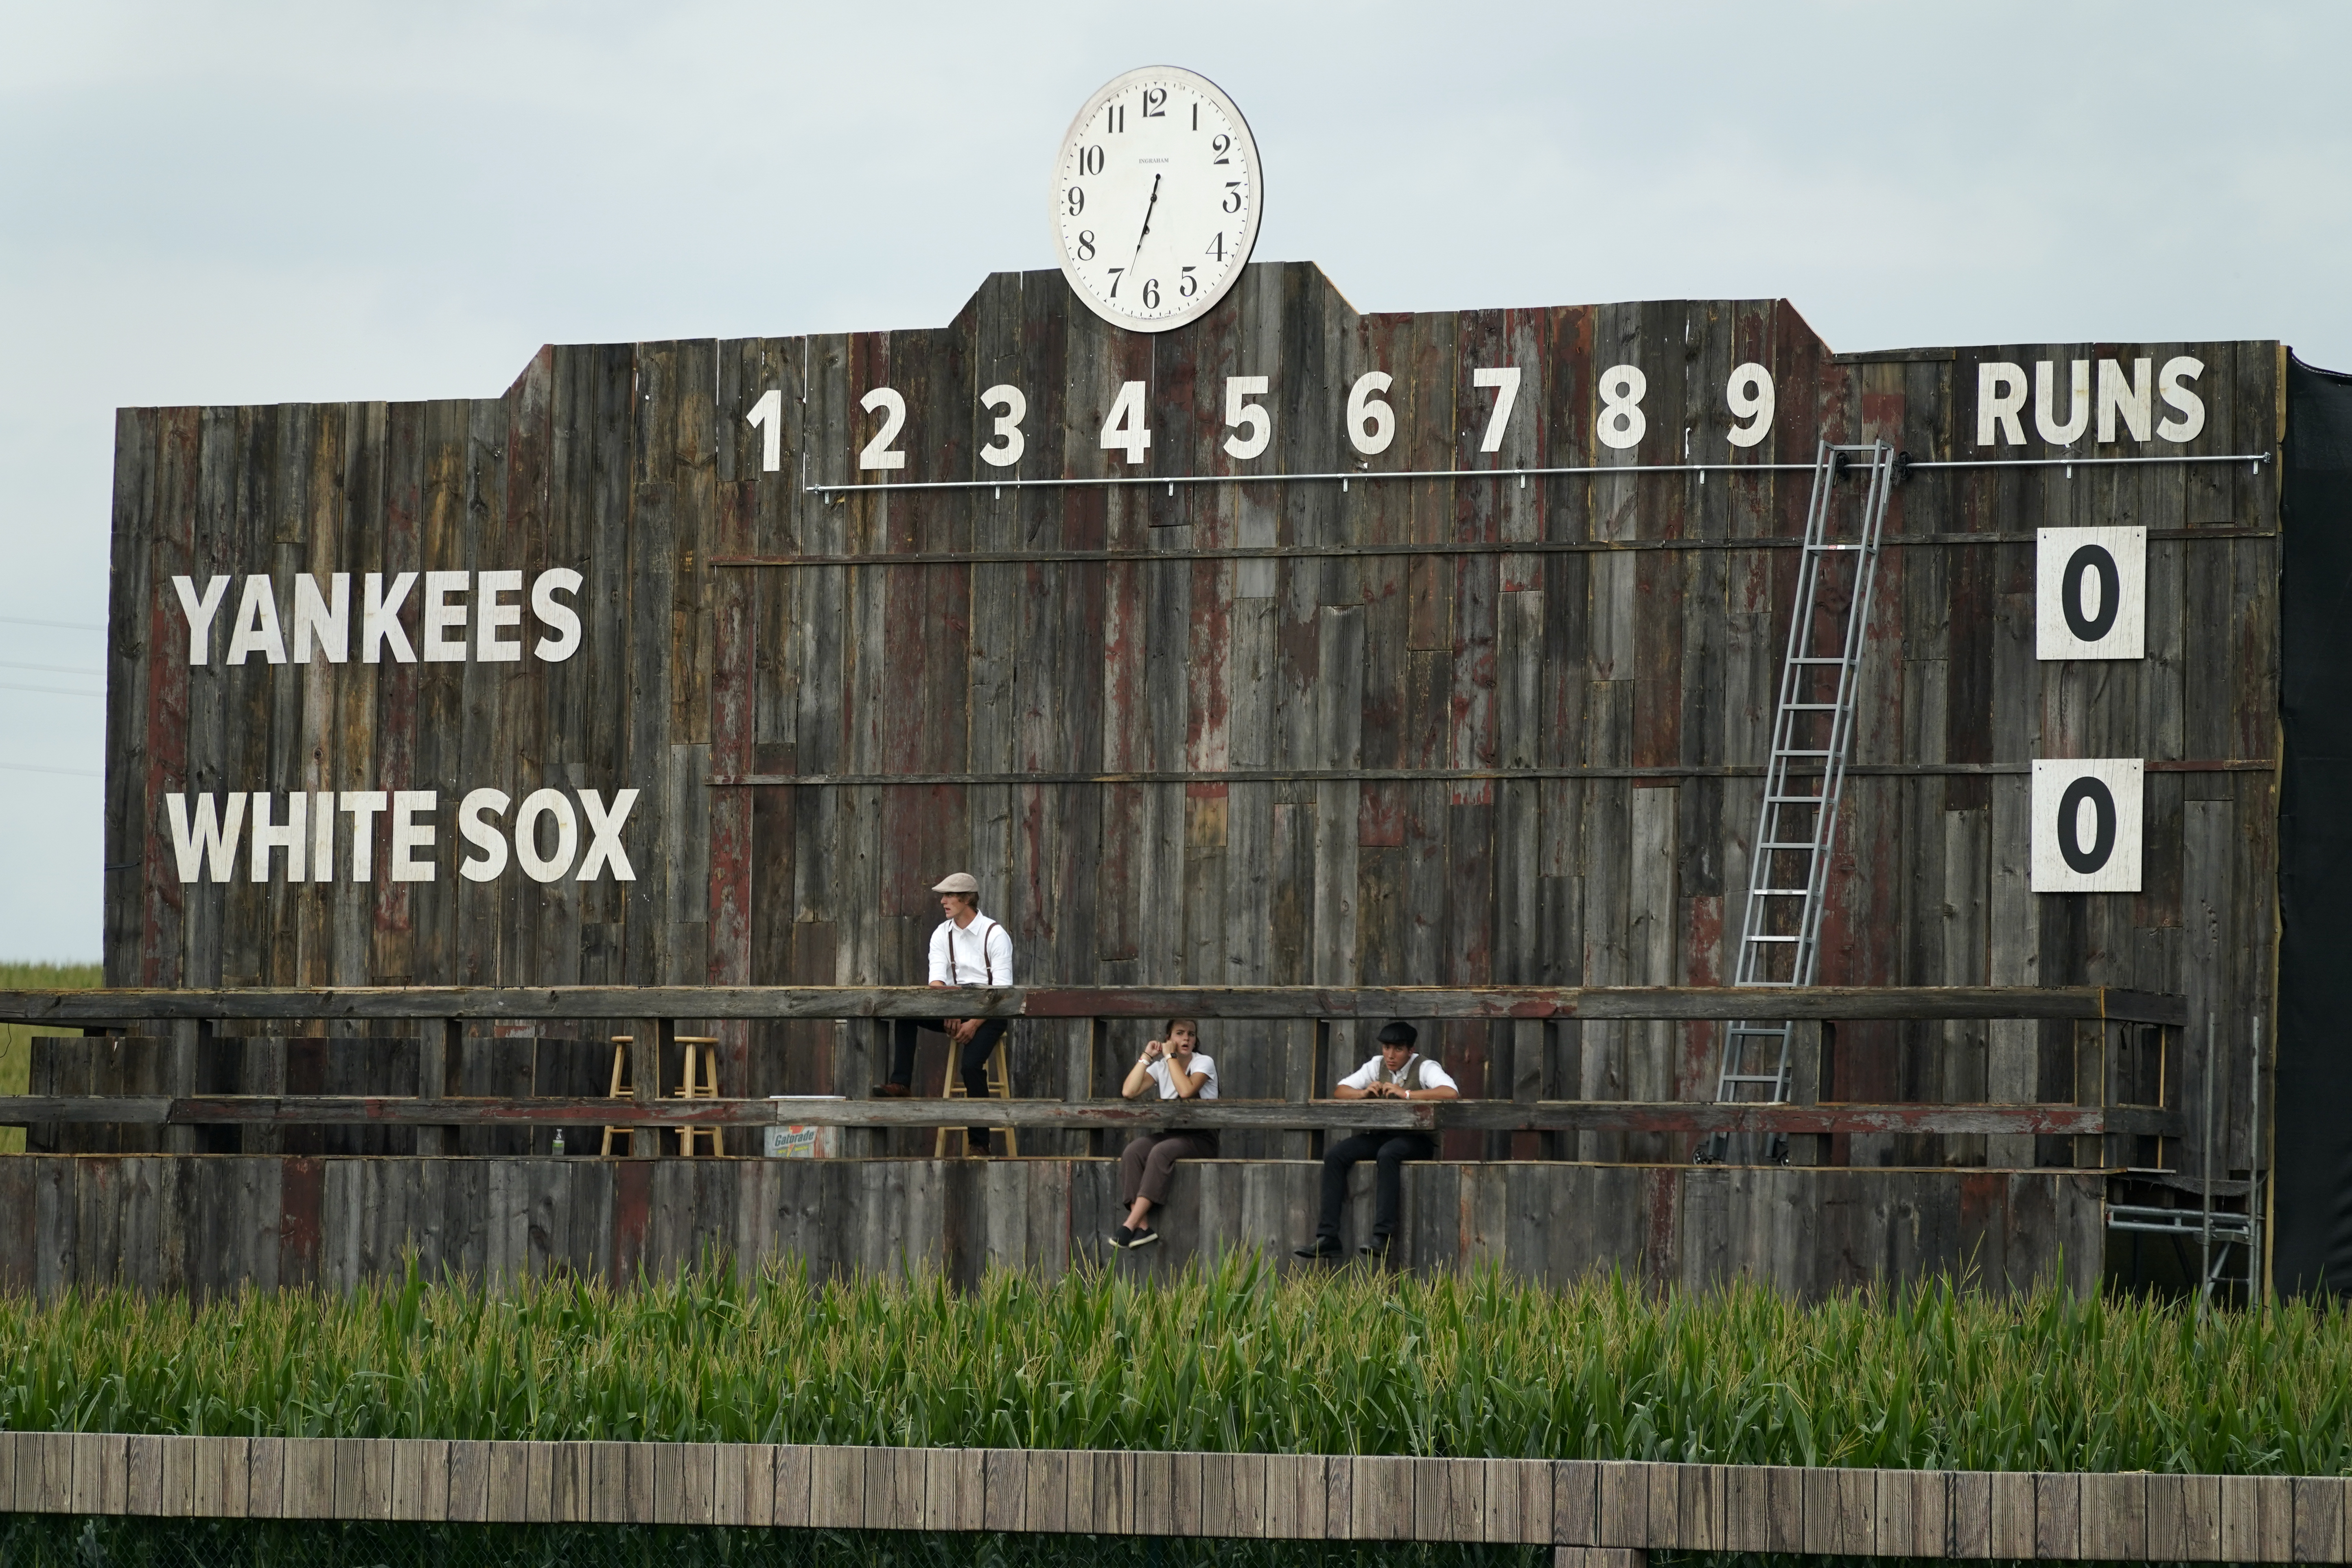 Chisox, Yanks deliver Hollywood ending to Field of Dreams game in Iowa